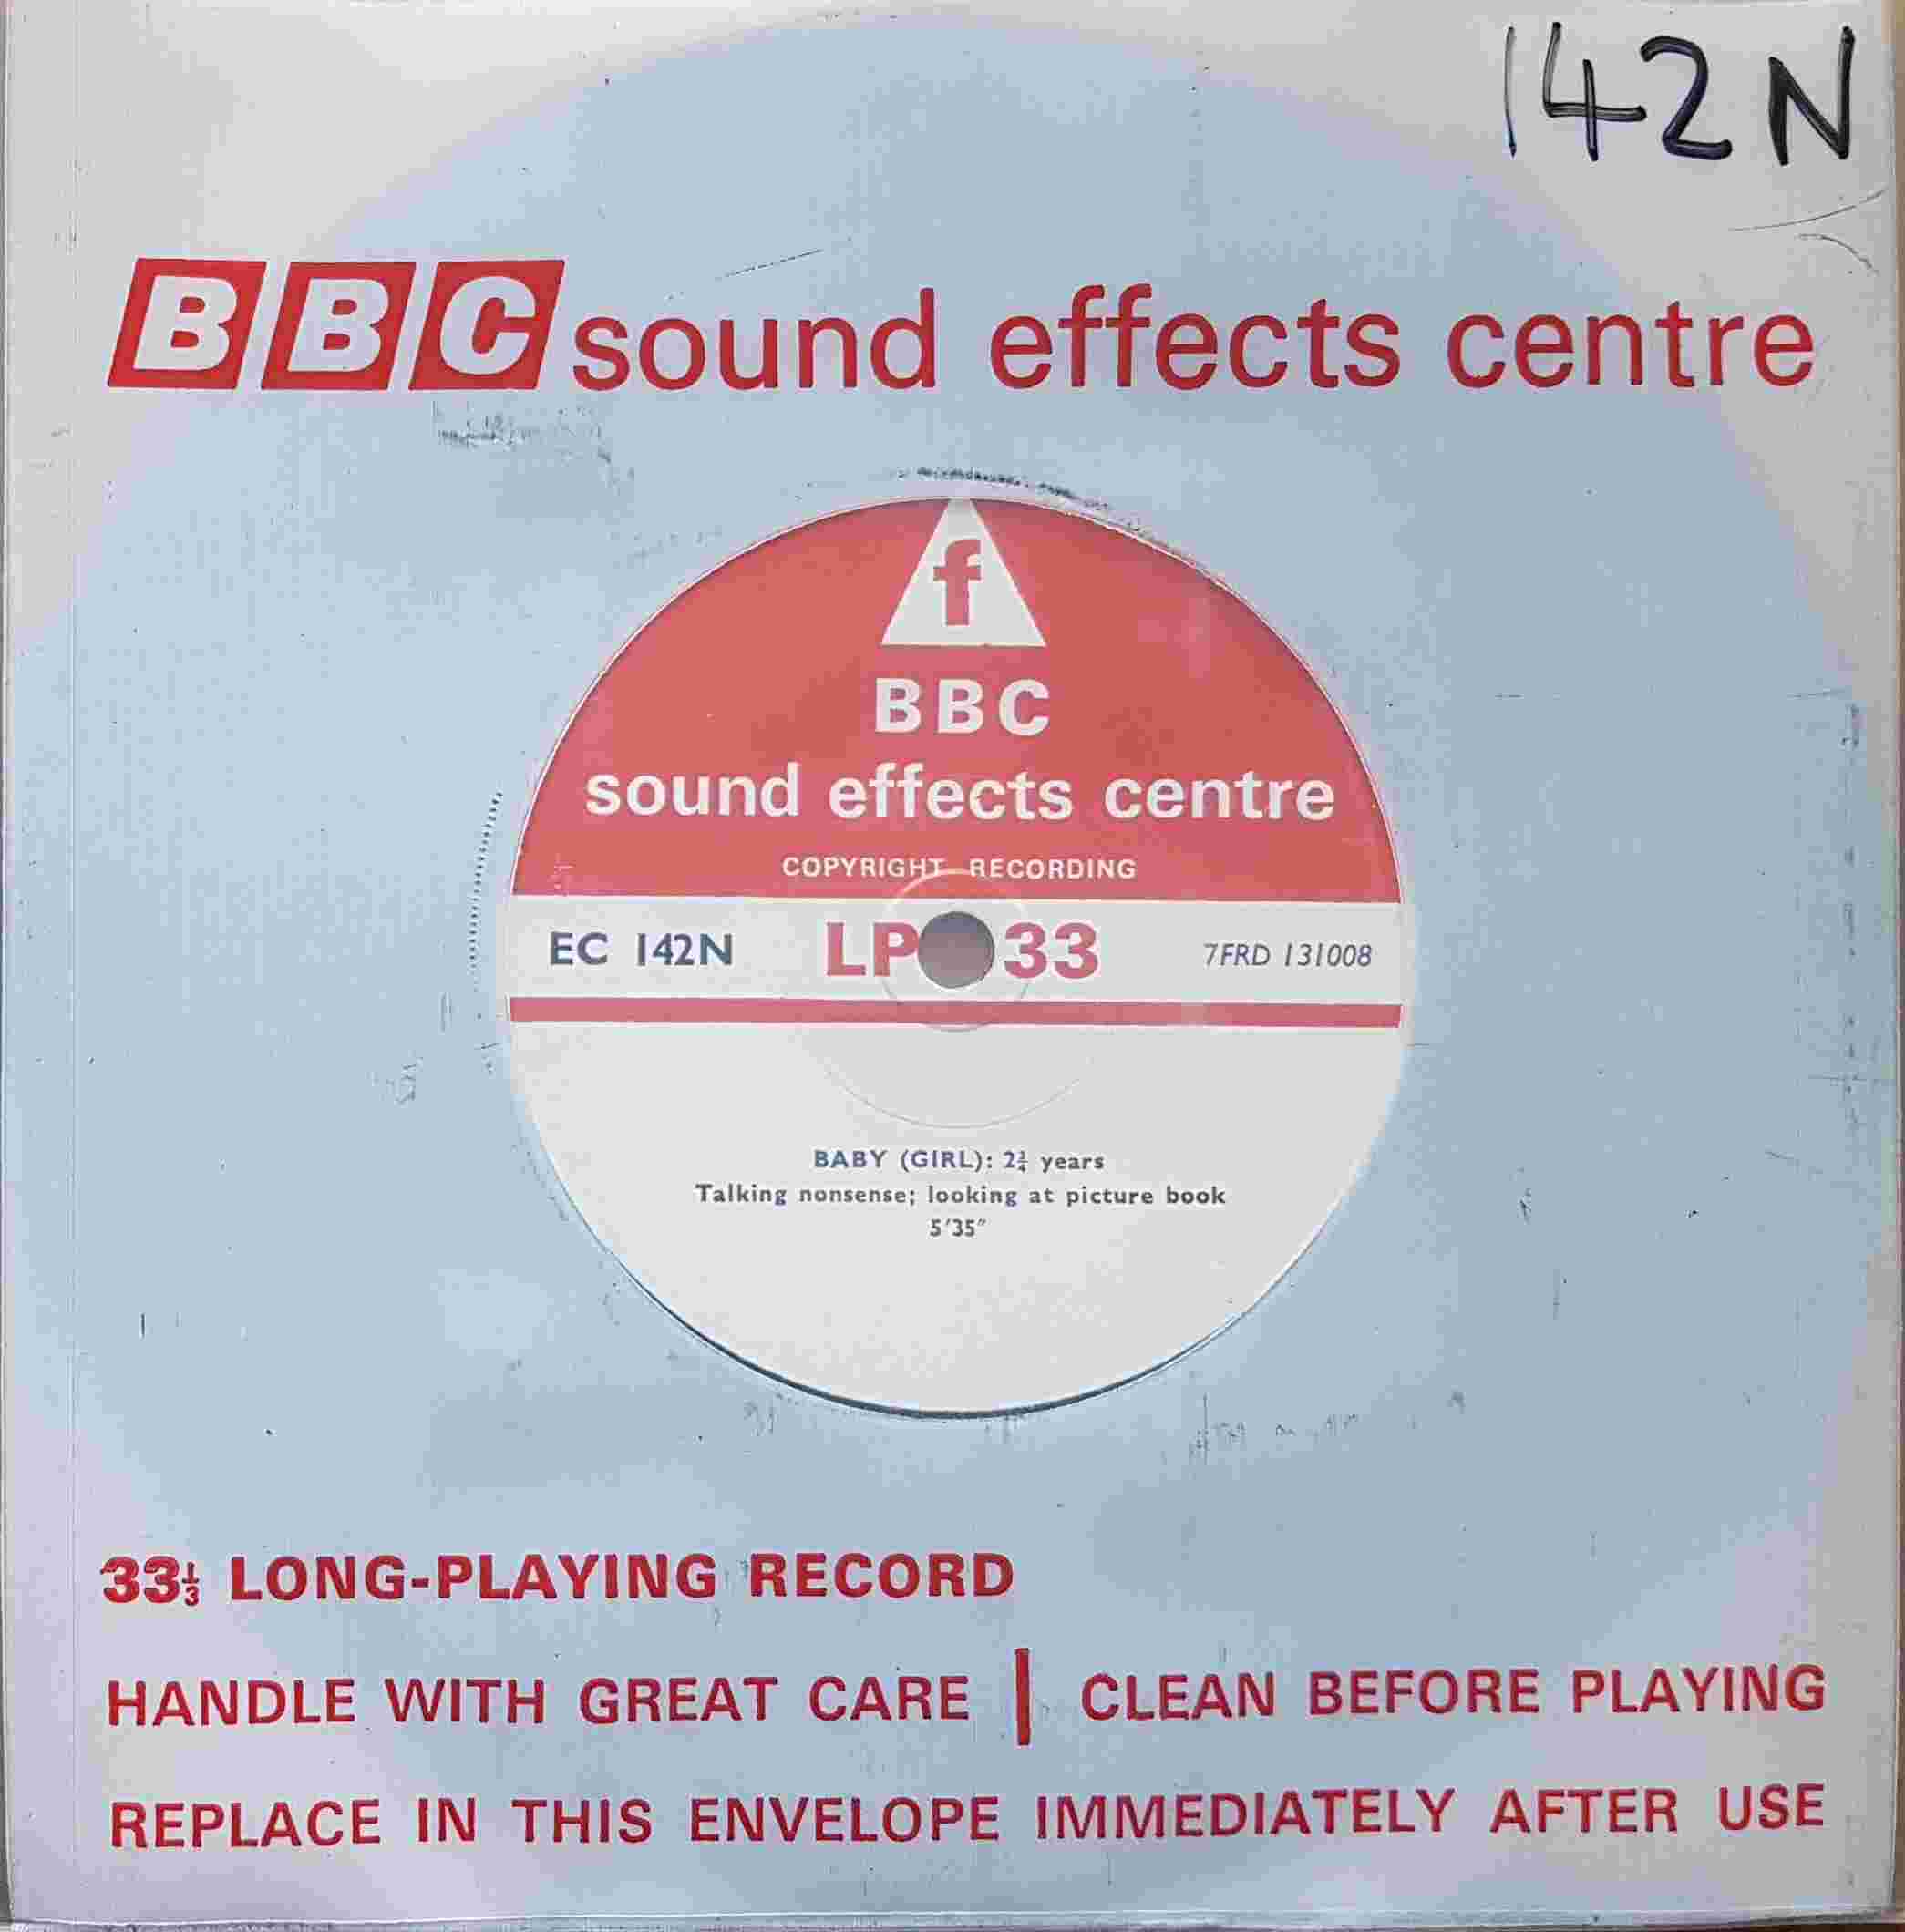 Picture of EC 142N Baby girl 2.75 years by artist Not registered from the BBC singles - Records and Tapes library